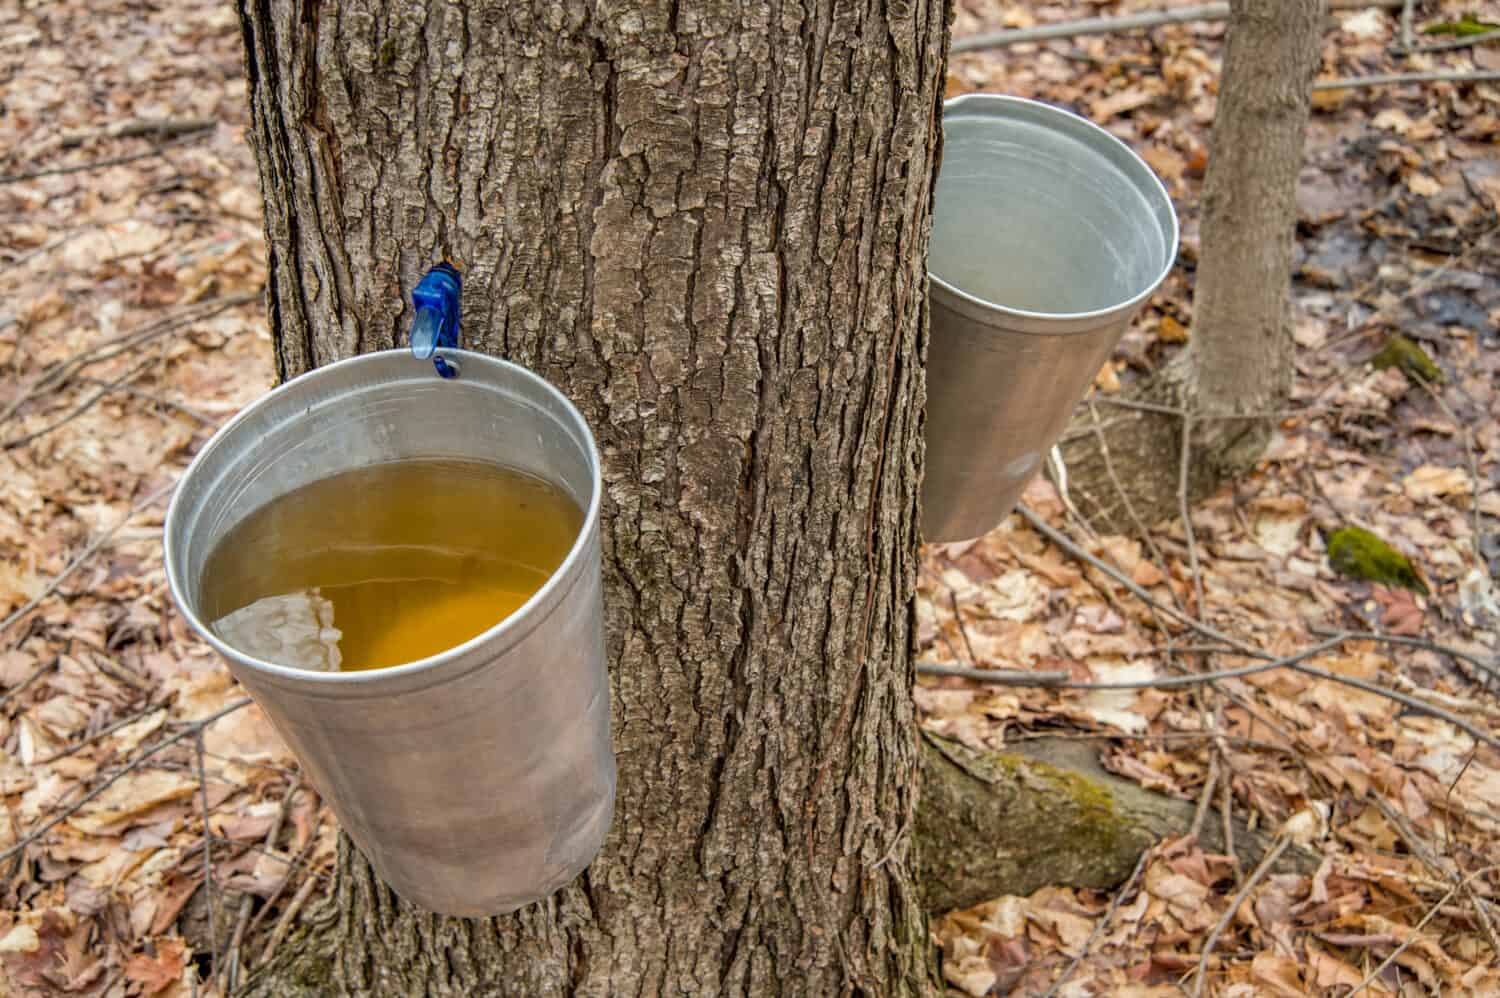 Pail used to collect sap of maple trees to produce maple syrup in Quebec.